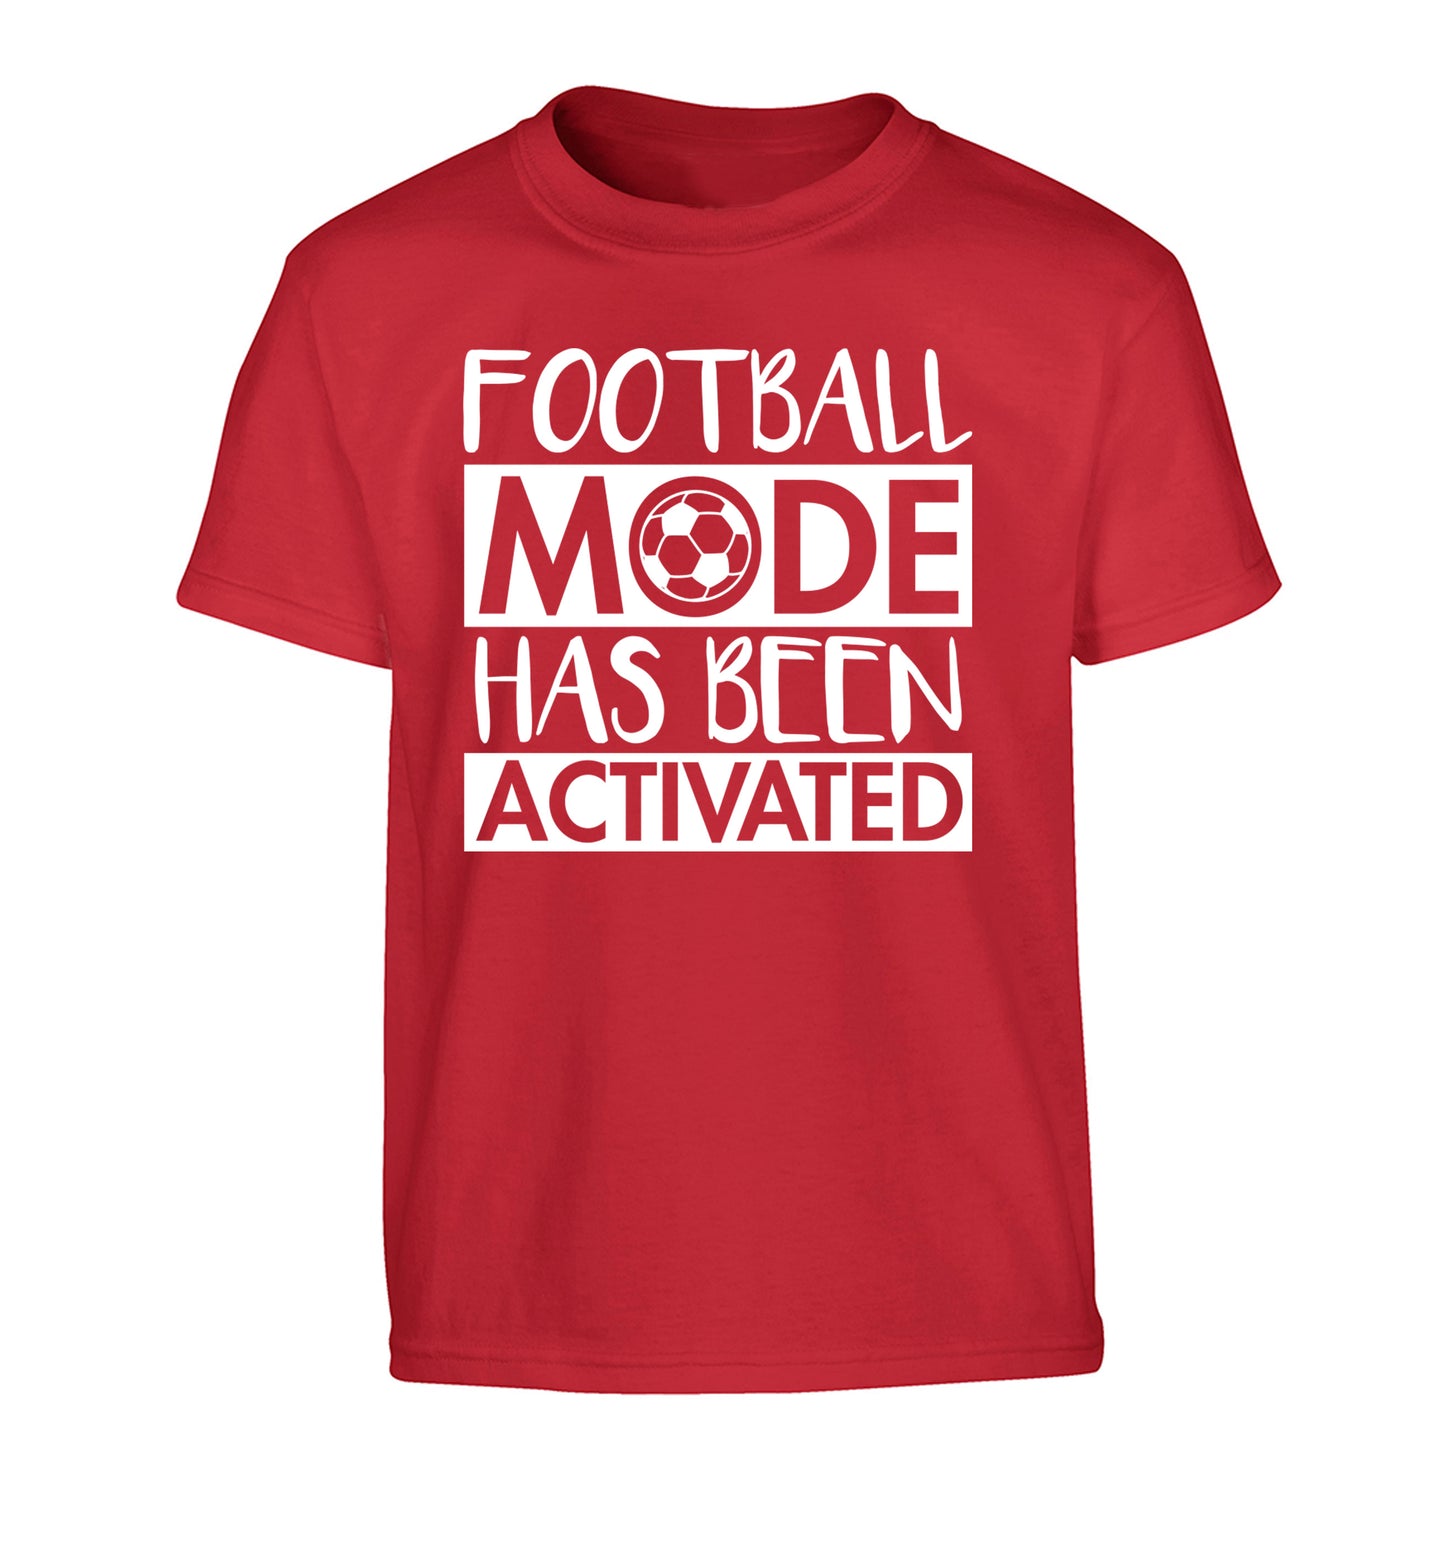 Football mode has been activated Children's red Tshirt 12-14 Years